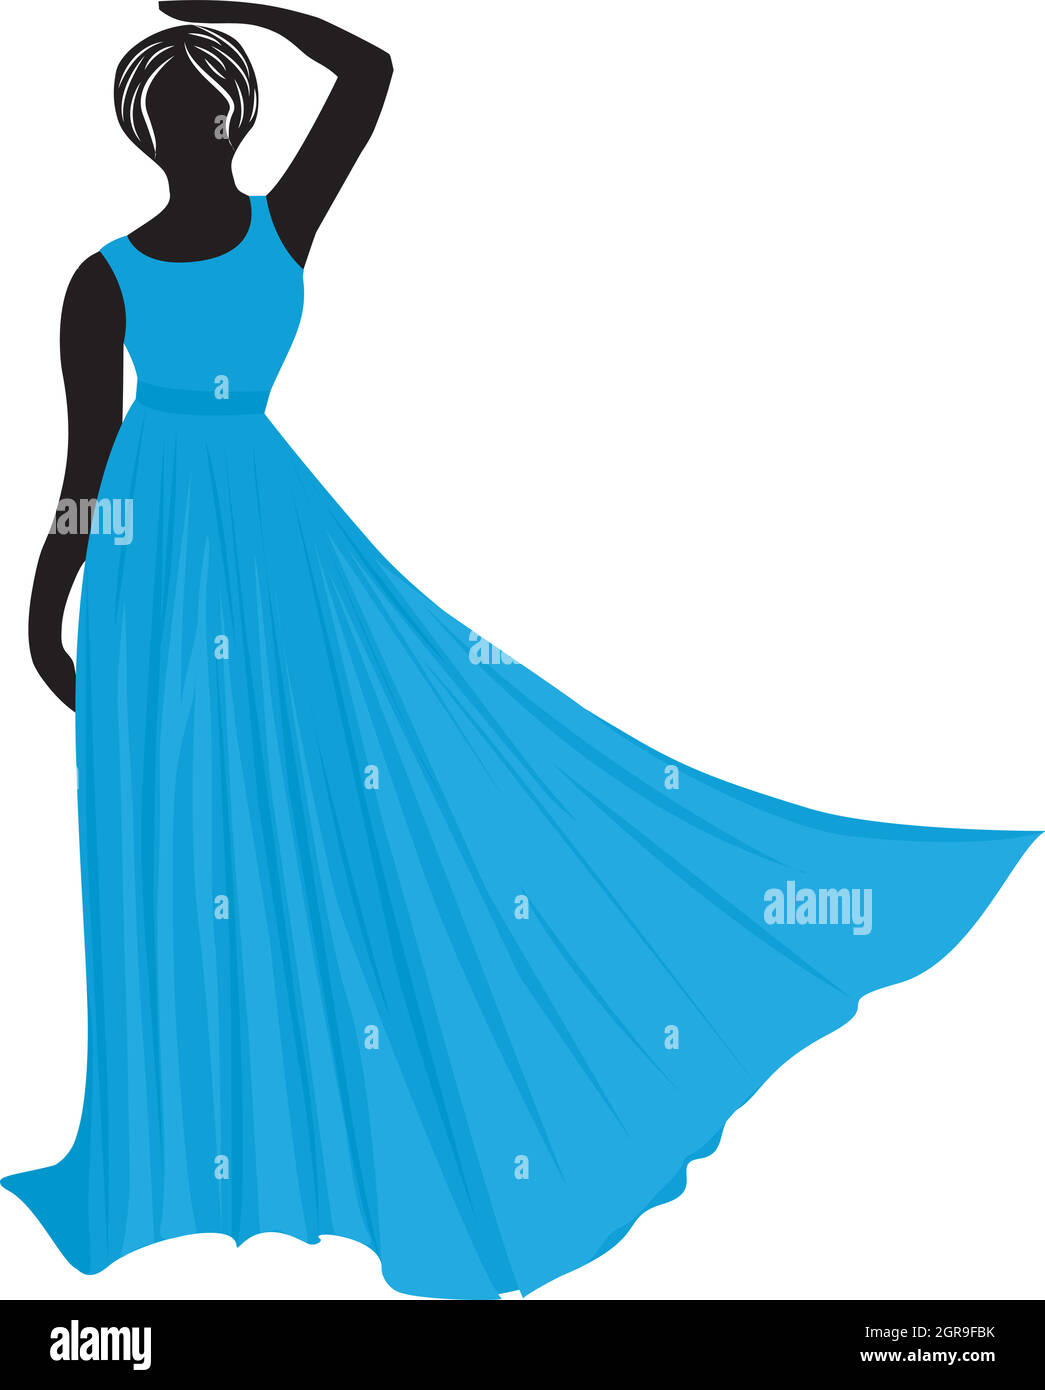 Young wemen in evening dresses party silhouettes Stock Vector